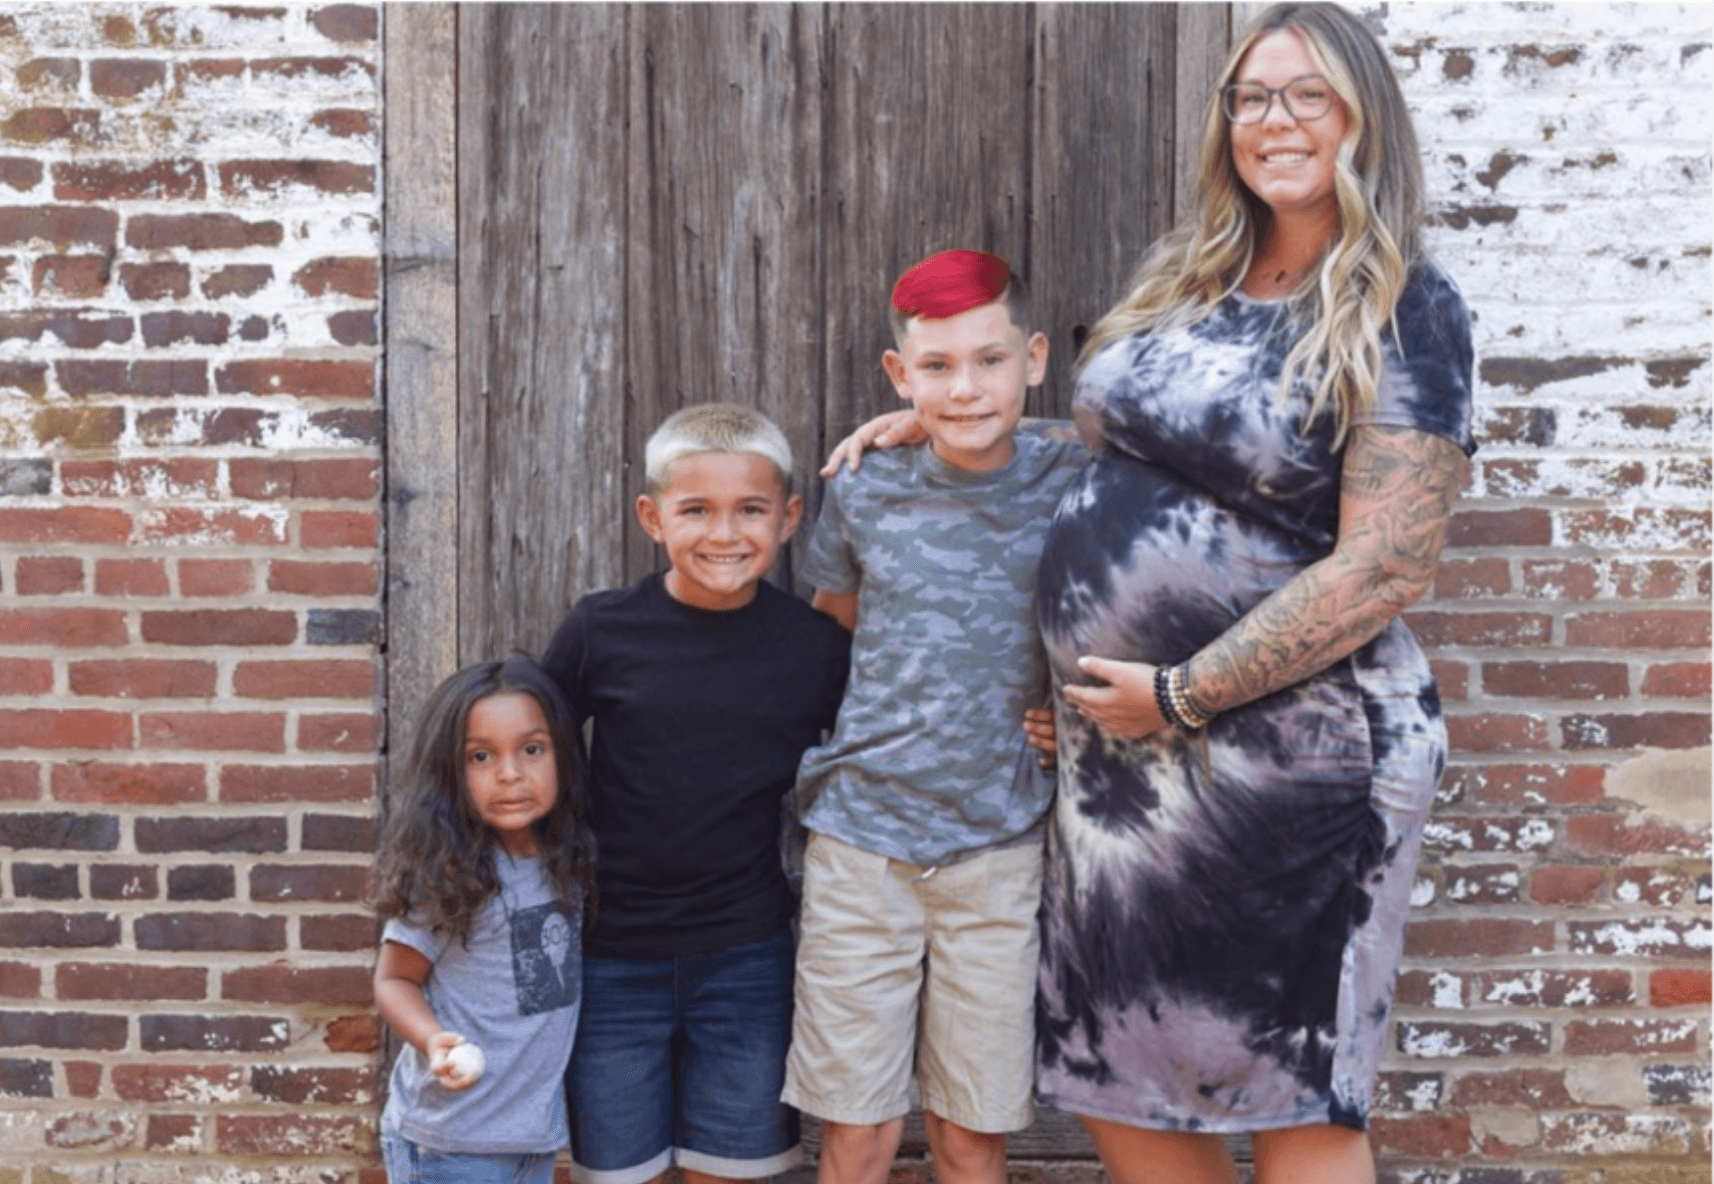 Chris Lopez Releases Shocking Statement Regarding His New Baby With Kailyn Lowry!